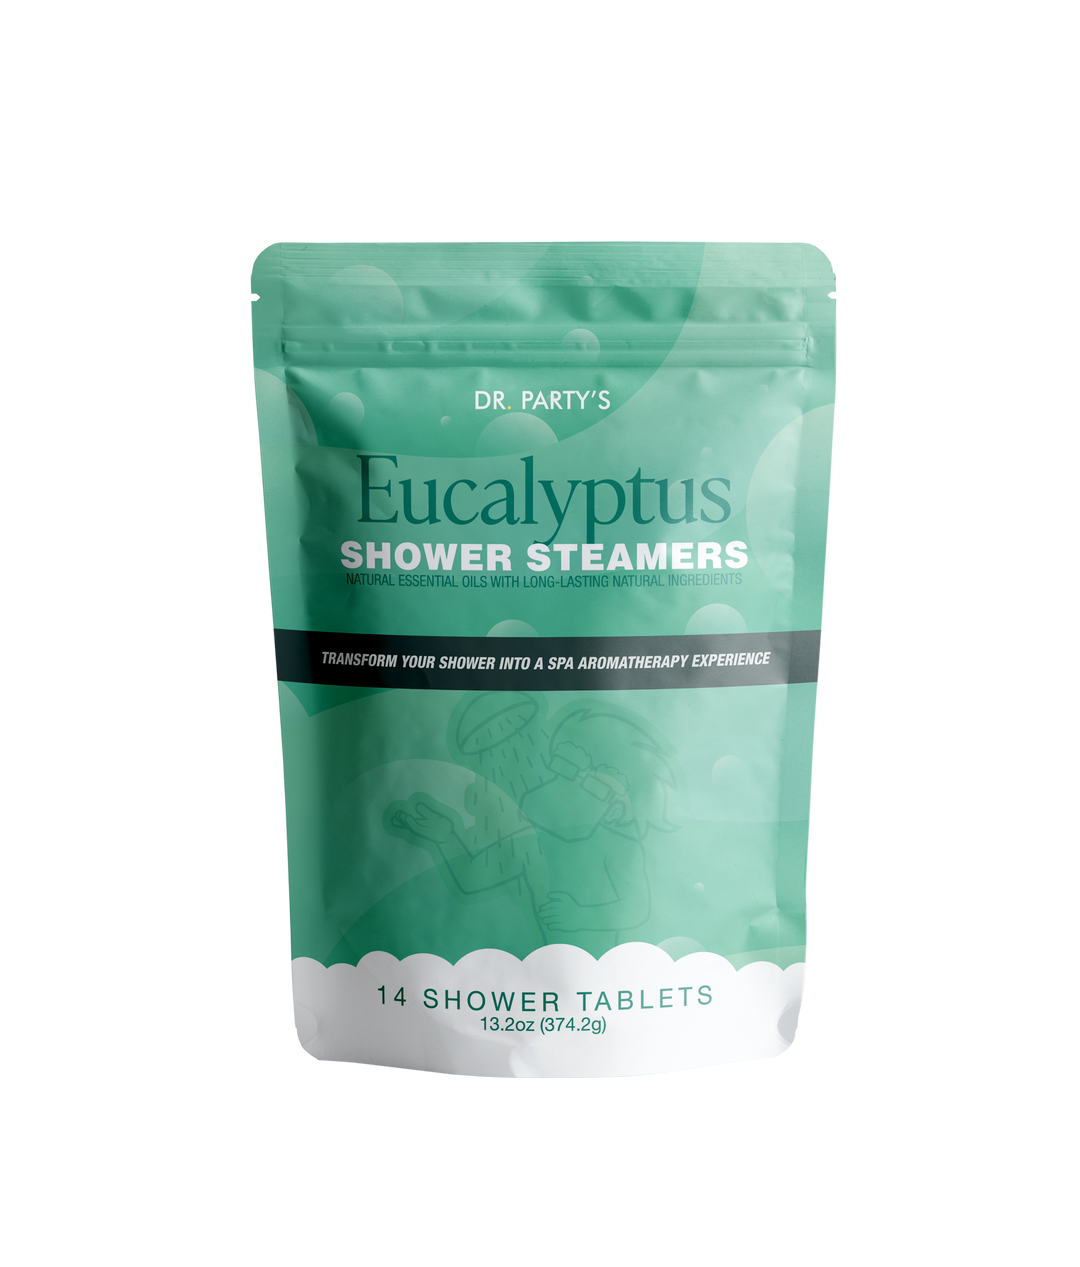 Breathe deeply and relax with our eucalyptus shower steamers, featuring a 14-tablet pack that transforms your shower into a refreshing spa escape.